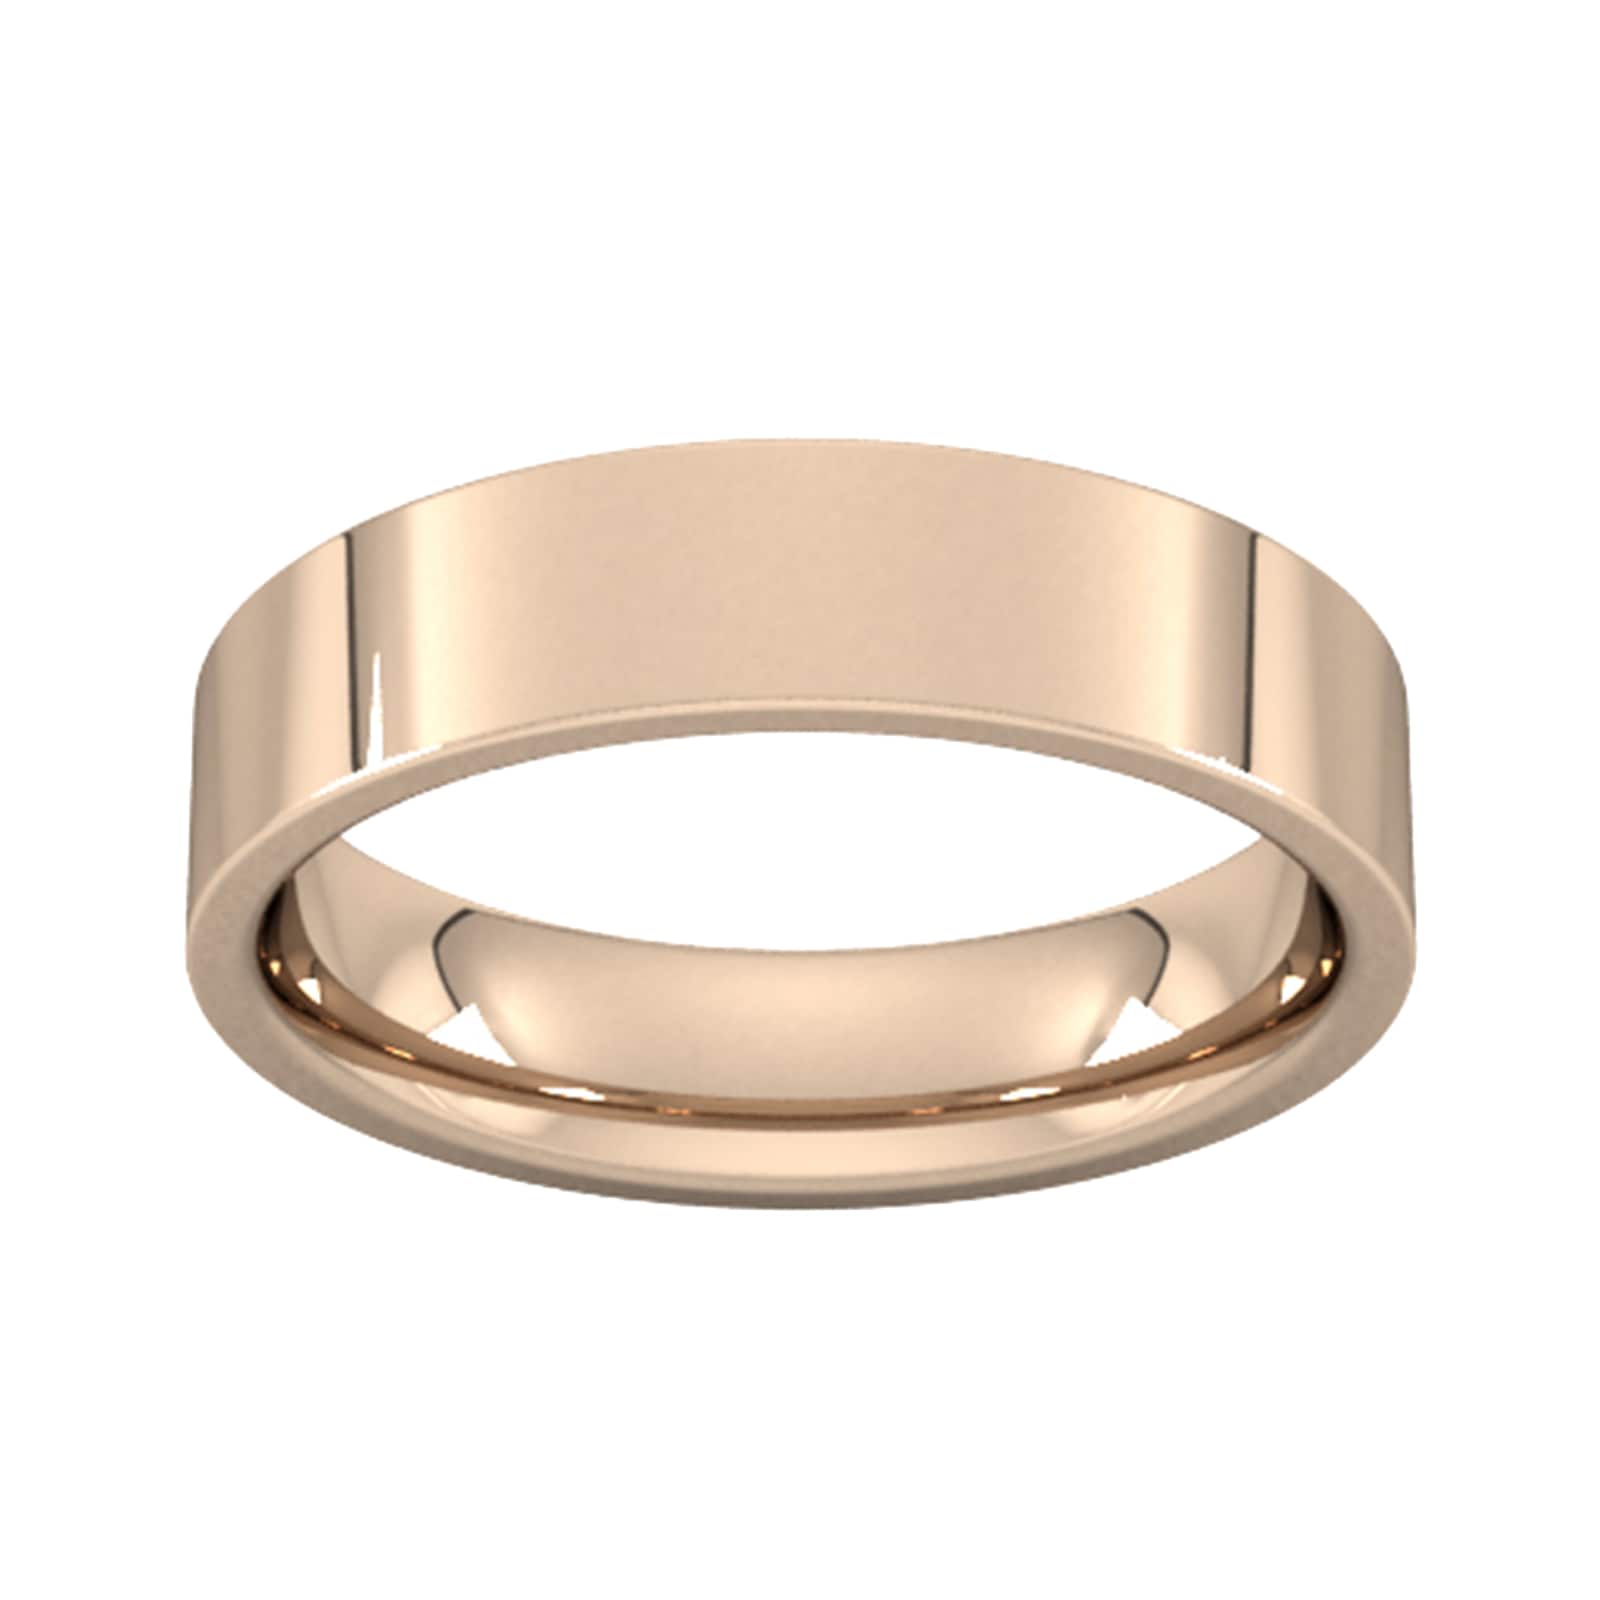 5mm Flat Court Heavy Wedding Ring In 9 Carat Rose Gold - Ring Size H